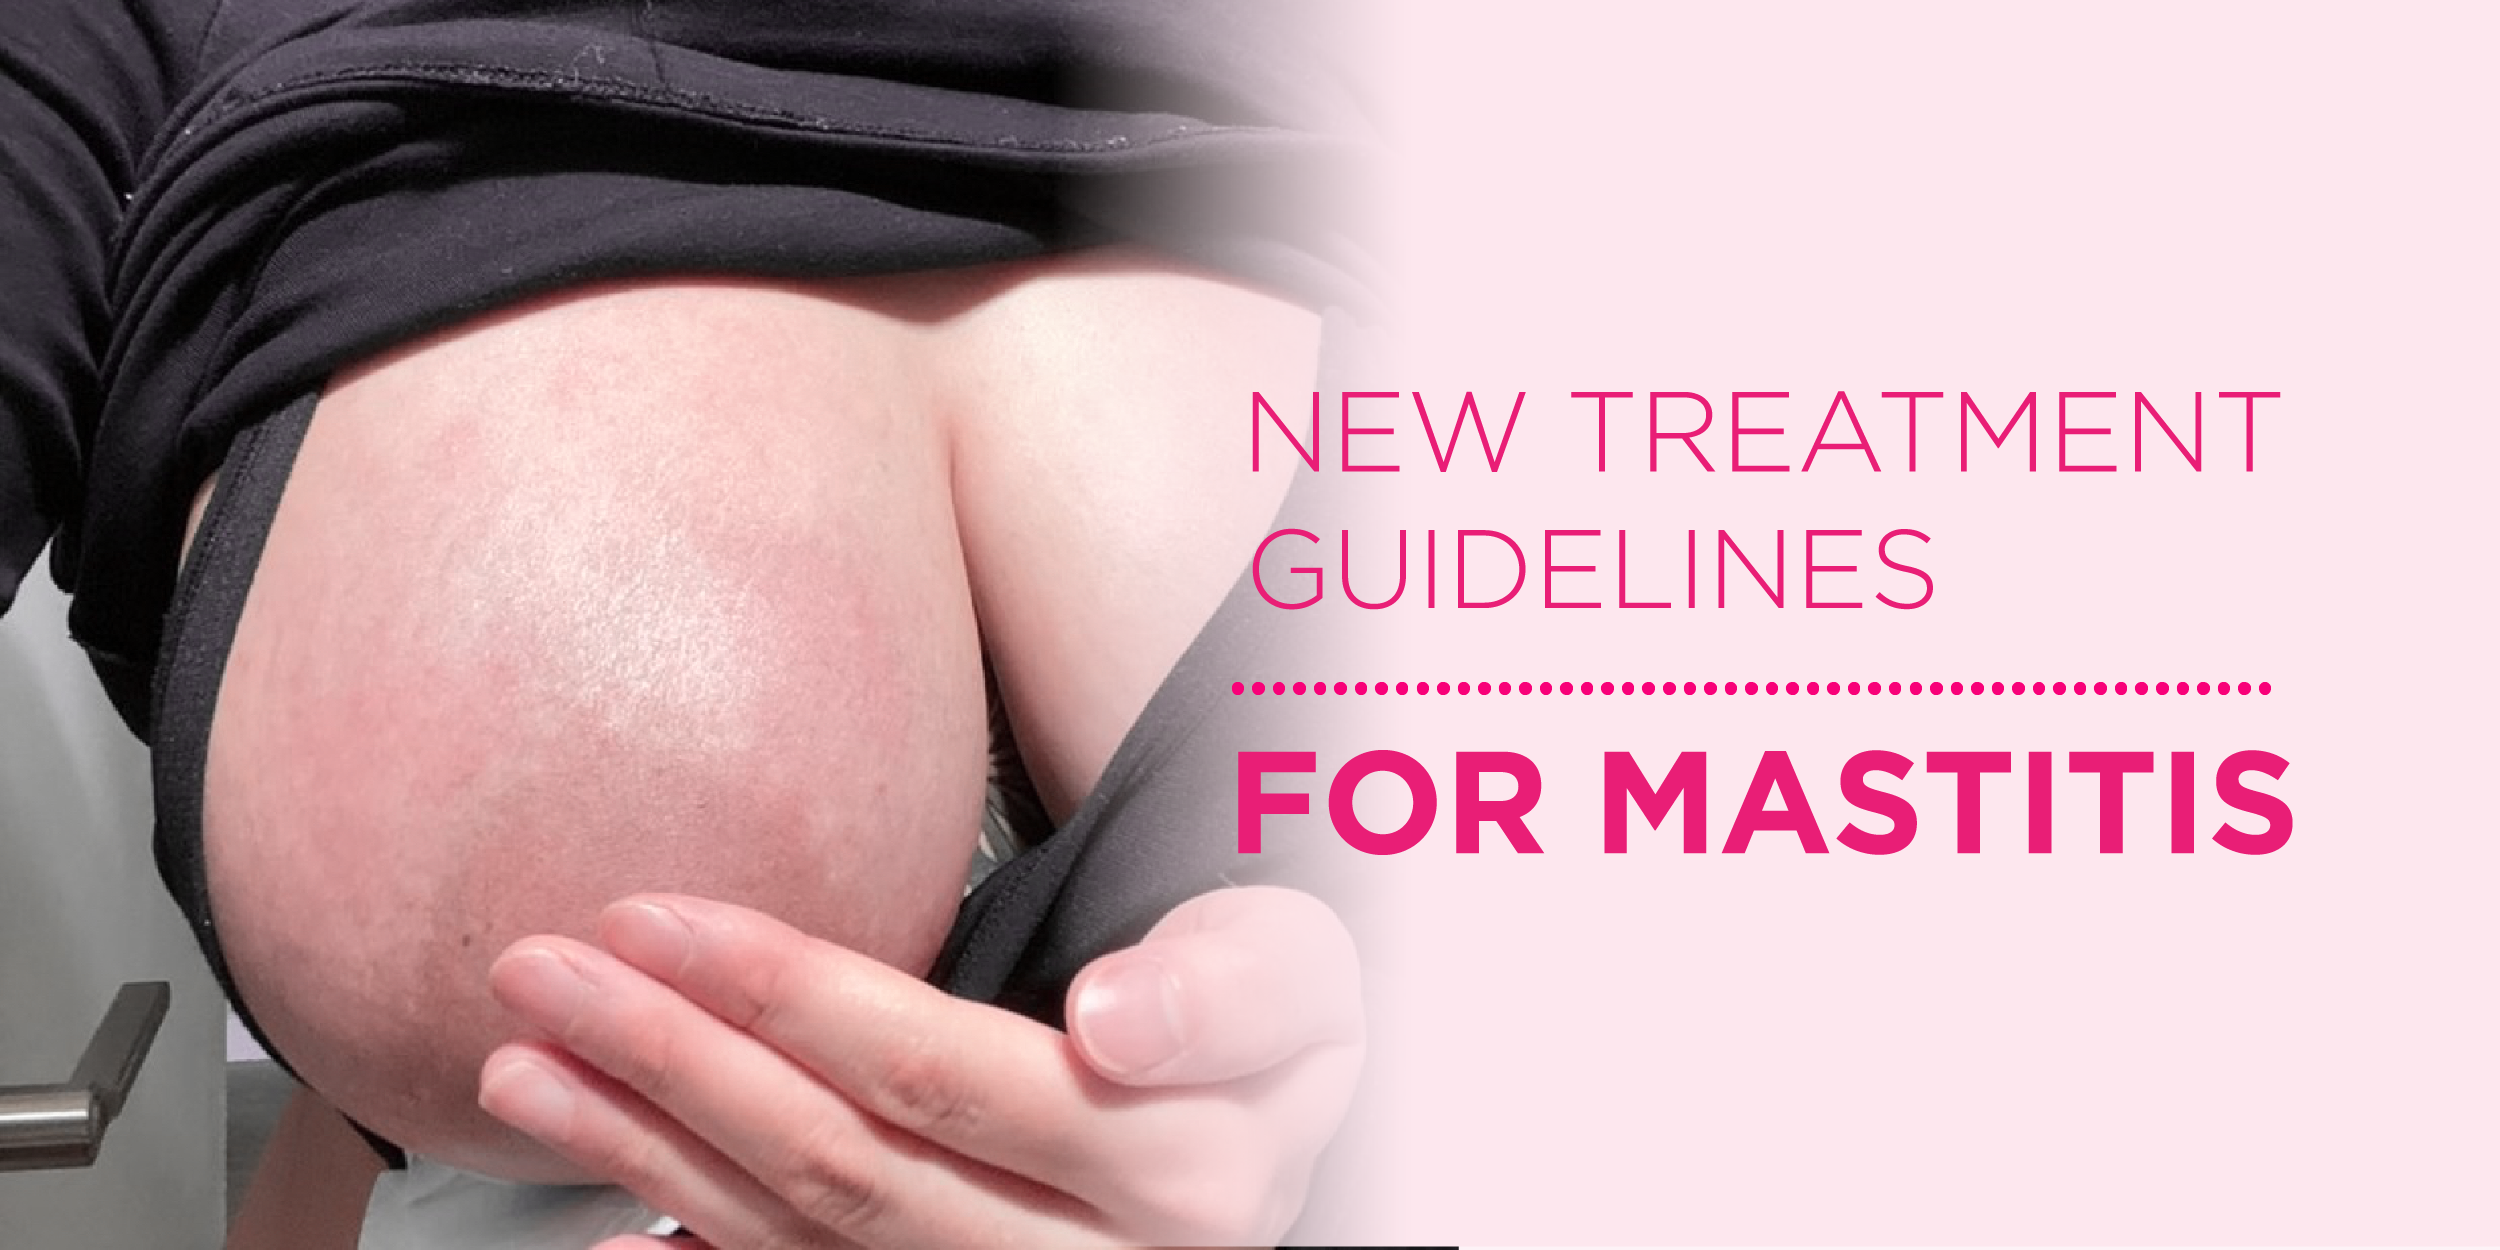 New treatment guidelines for Mastitis